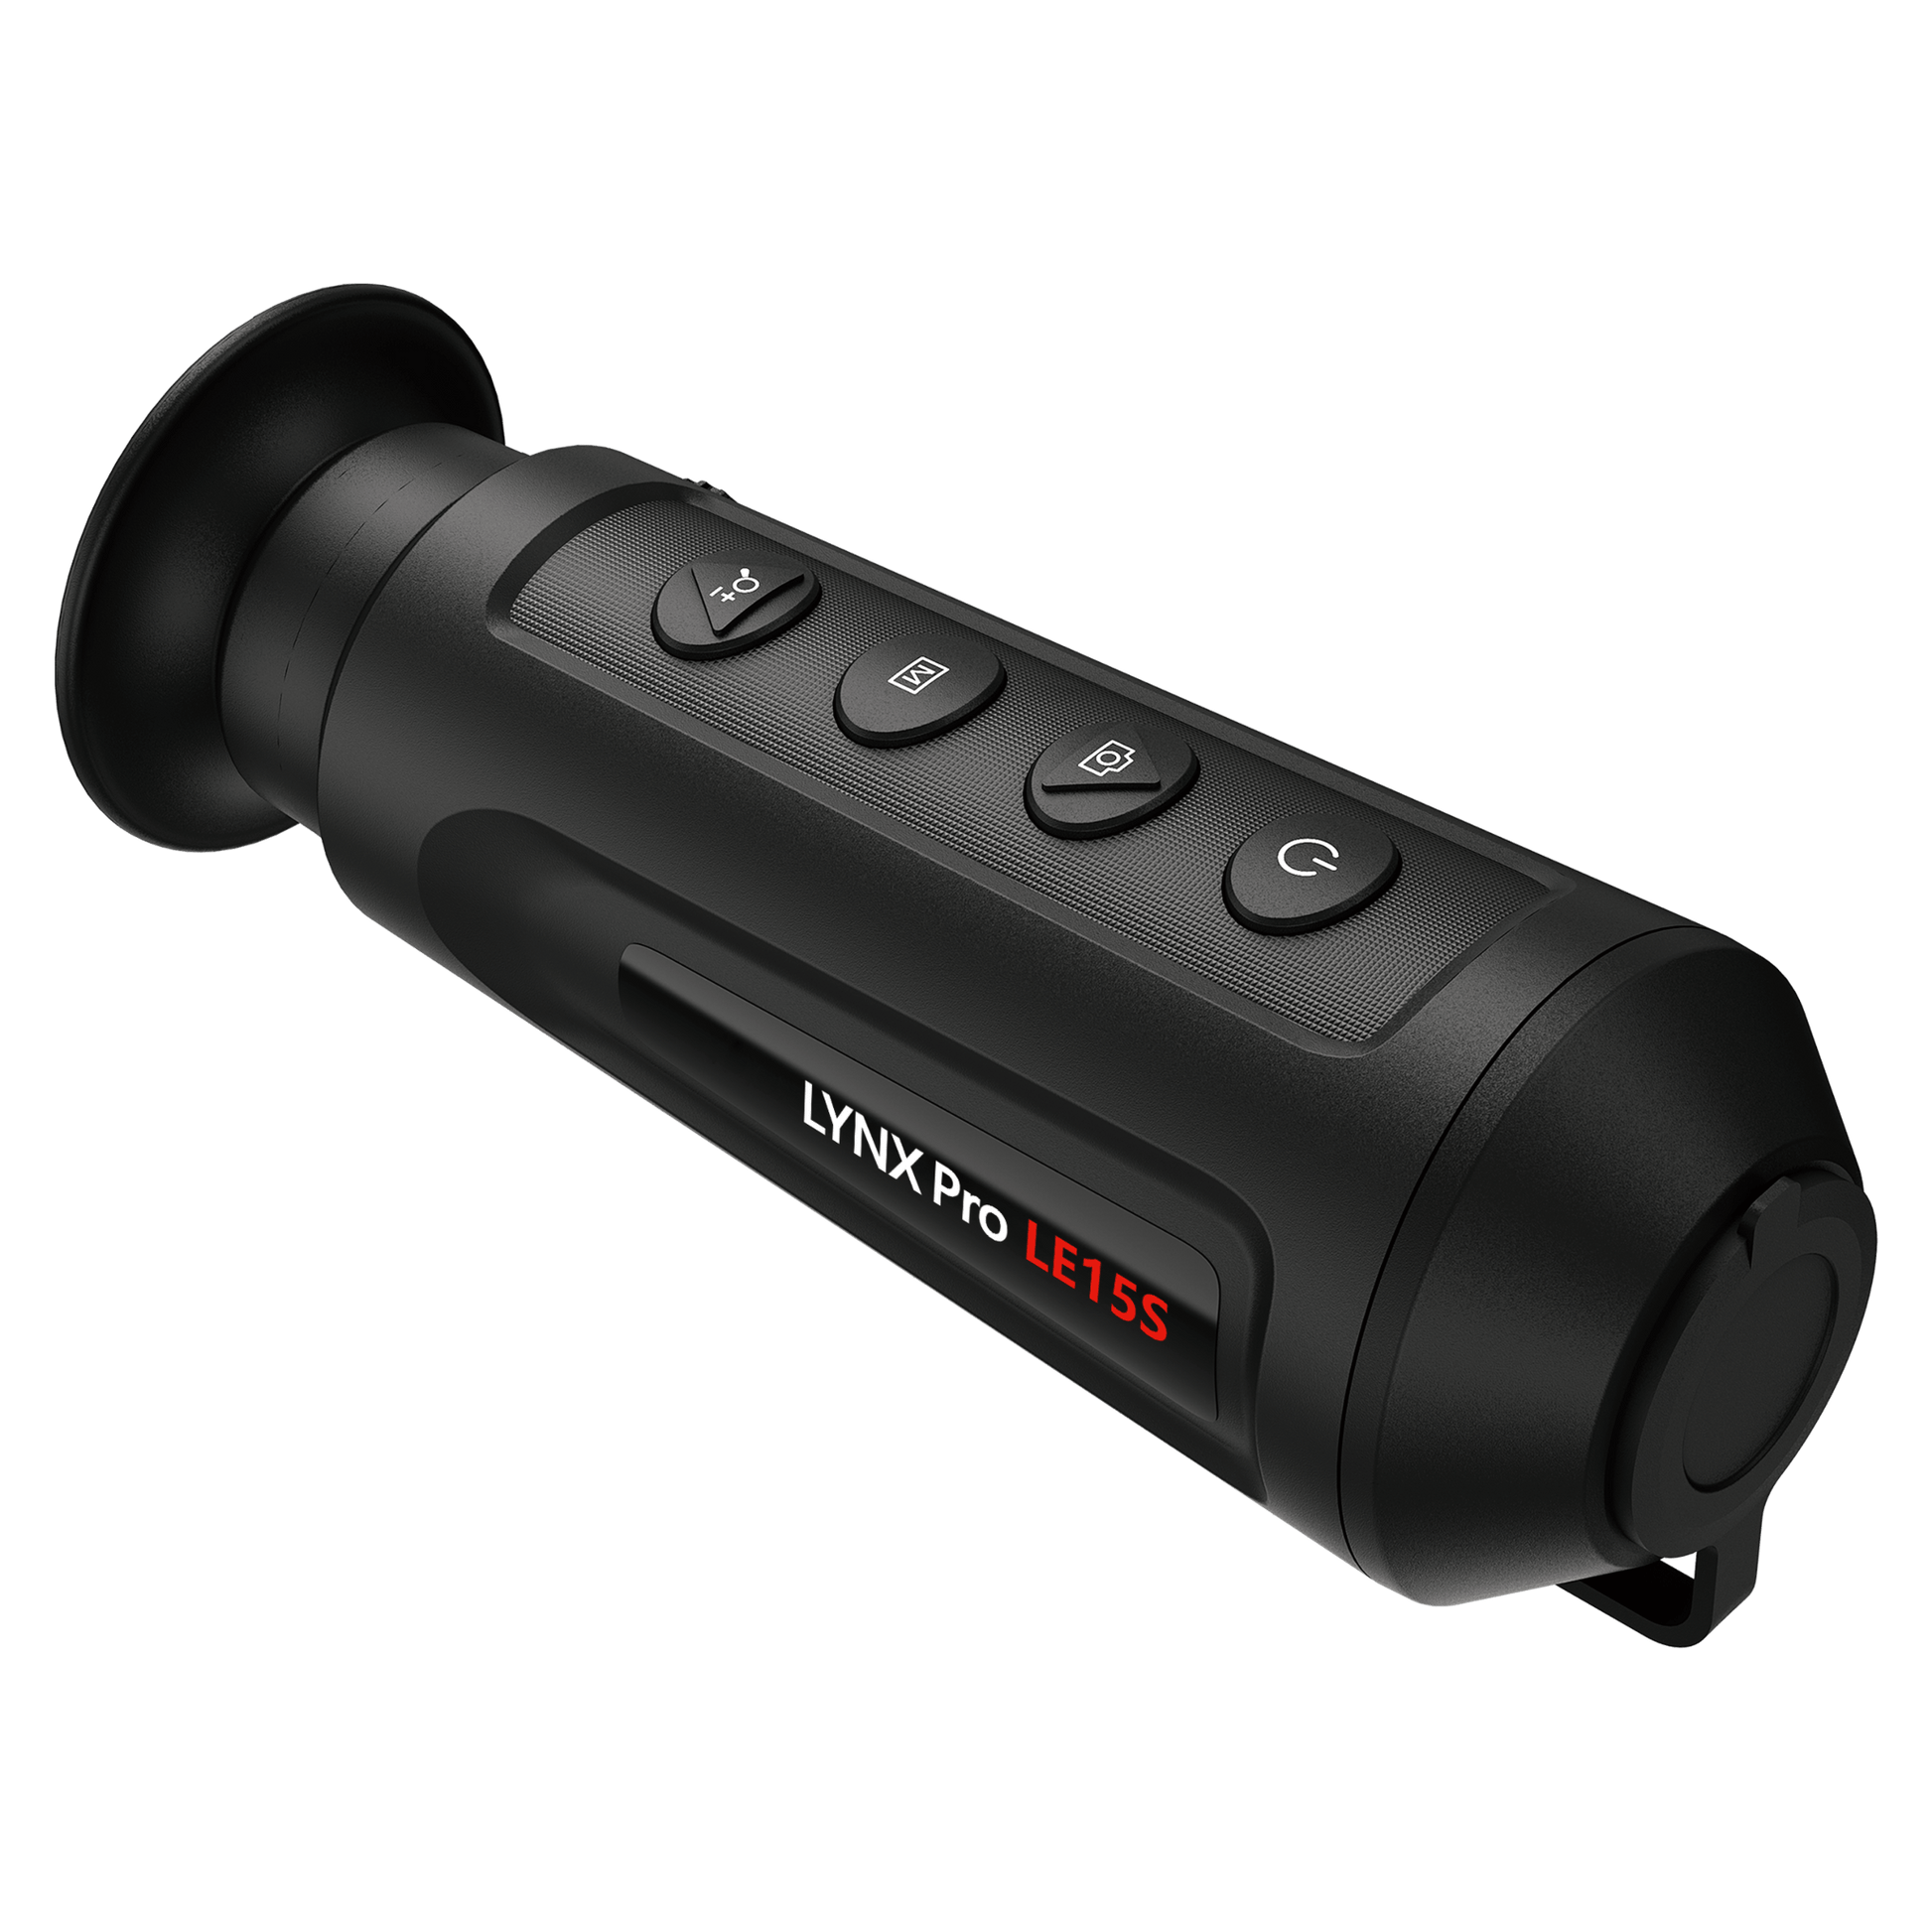 Lynx Pro LE15S Monocular front left view showing the device type